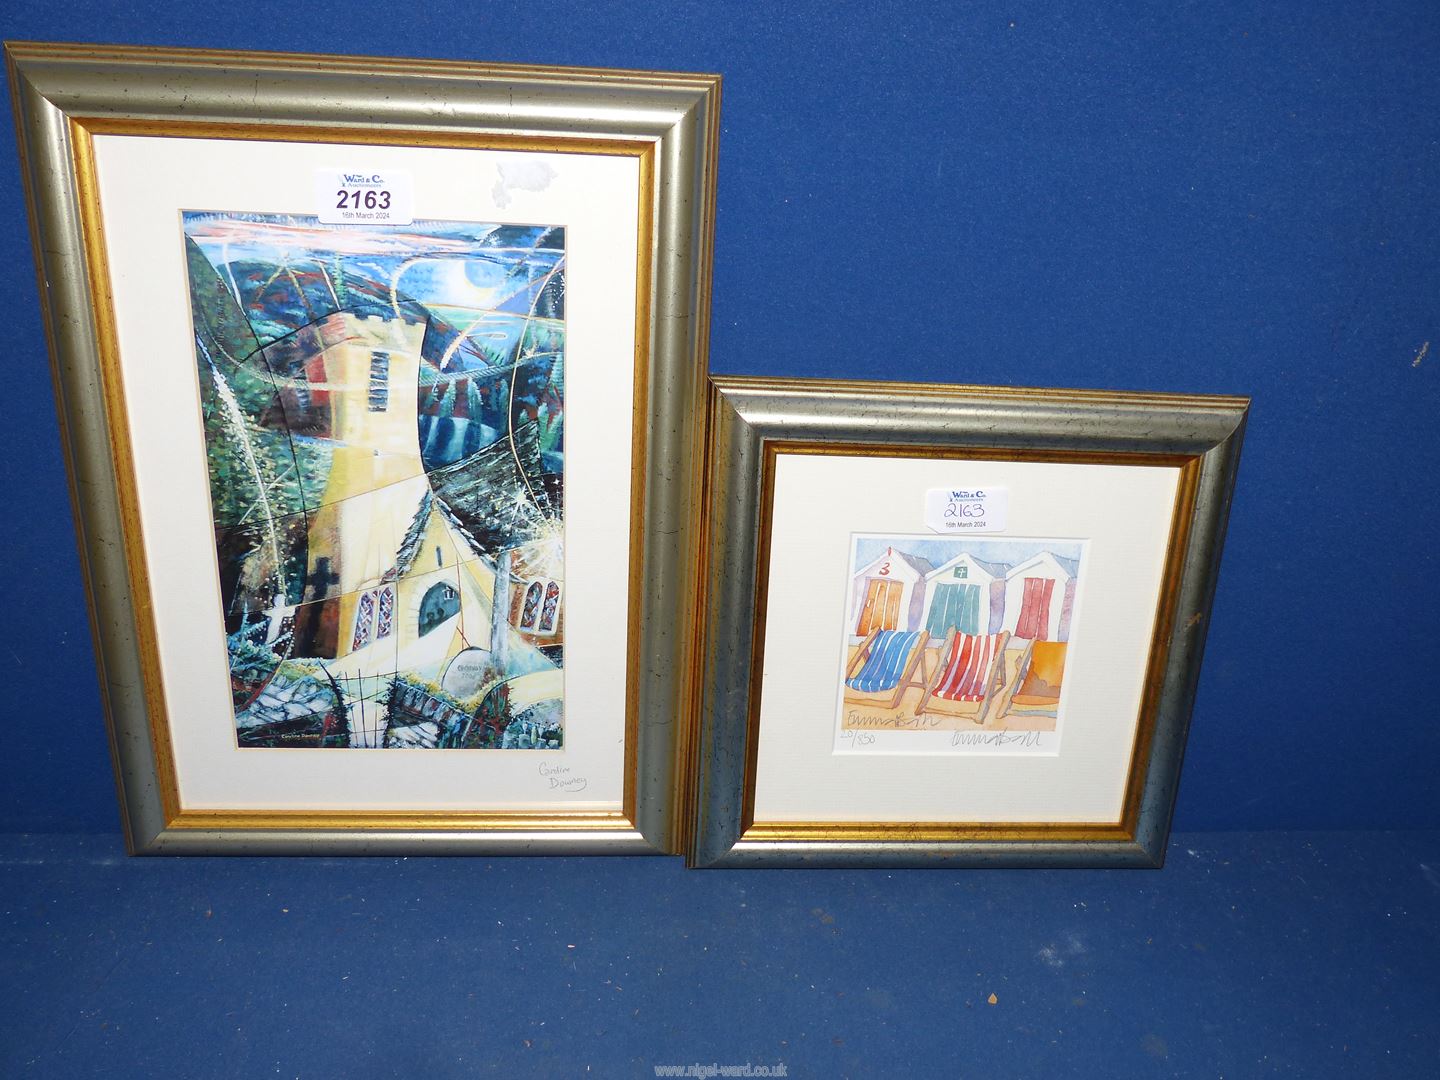 A framed and mounted Print of Cwmyoy Church by Caroline Downey and a Limited Edition Print (no.